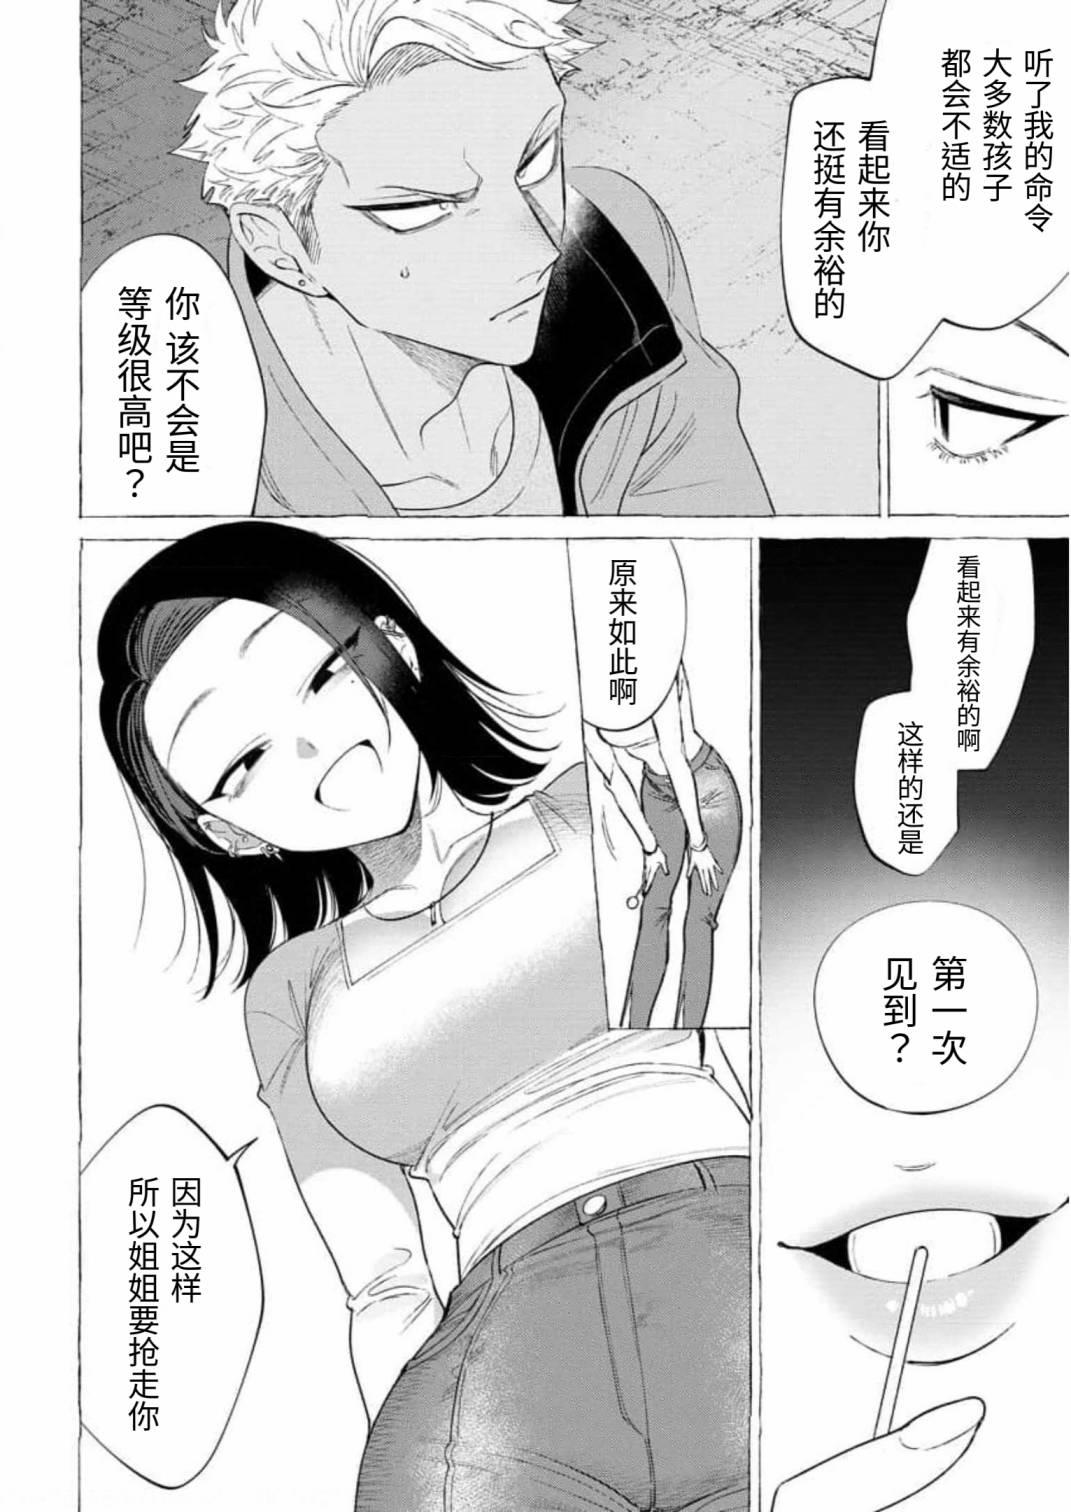 Busty Sweet Suffering Vibrator - Page 14